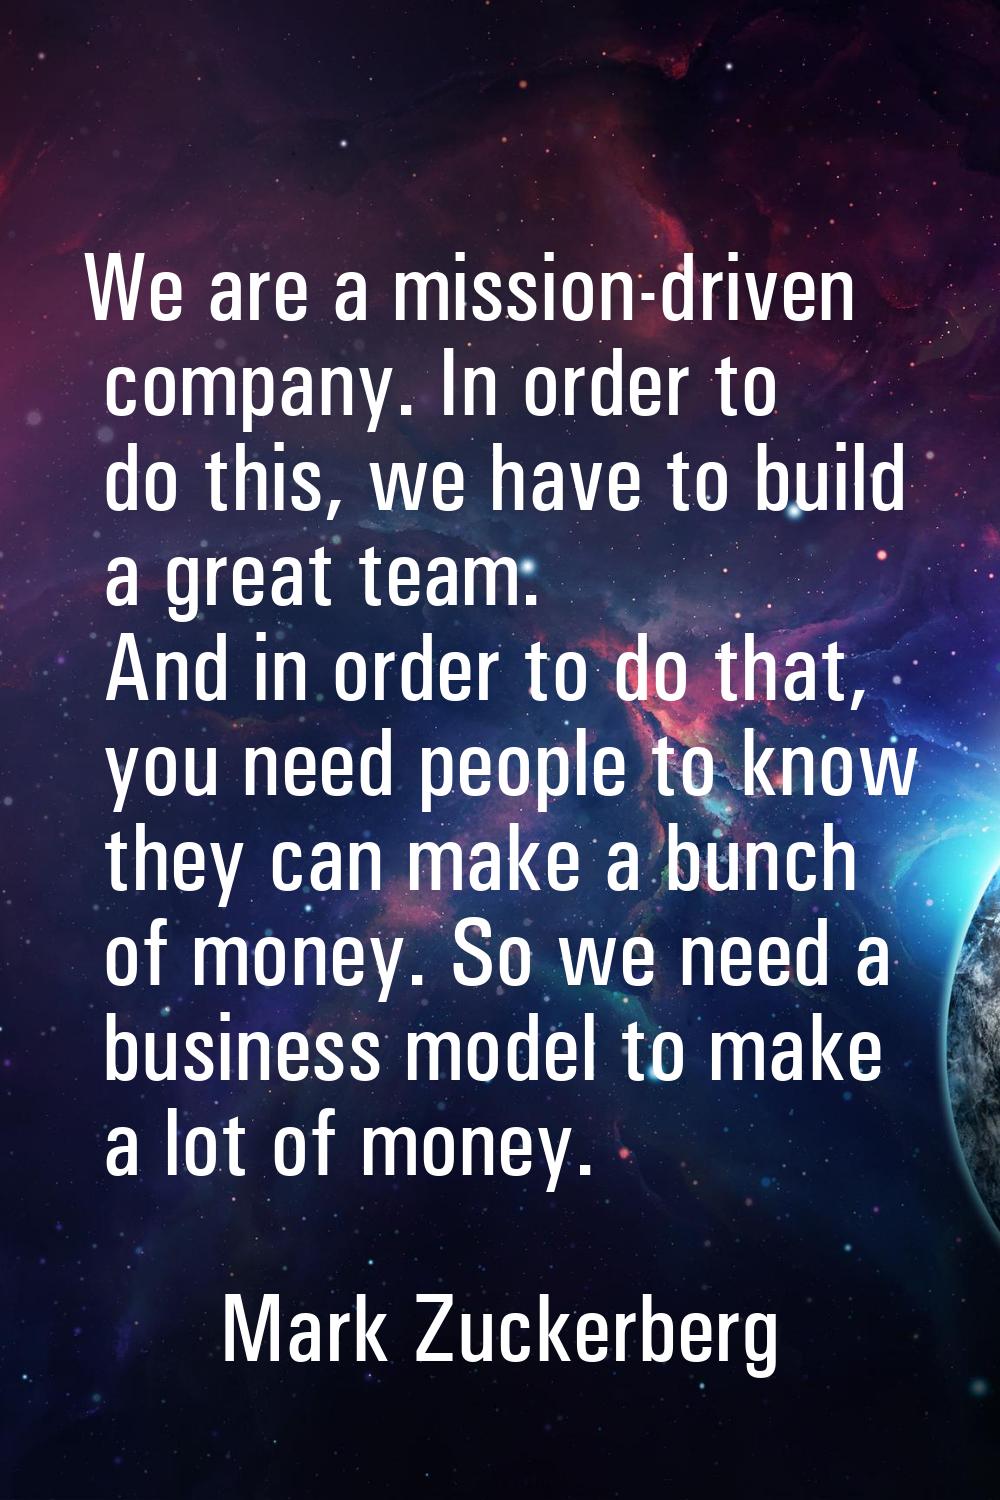 We are a mission-driven company. In order to do this, we have to build a great team. And in order t